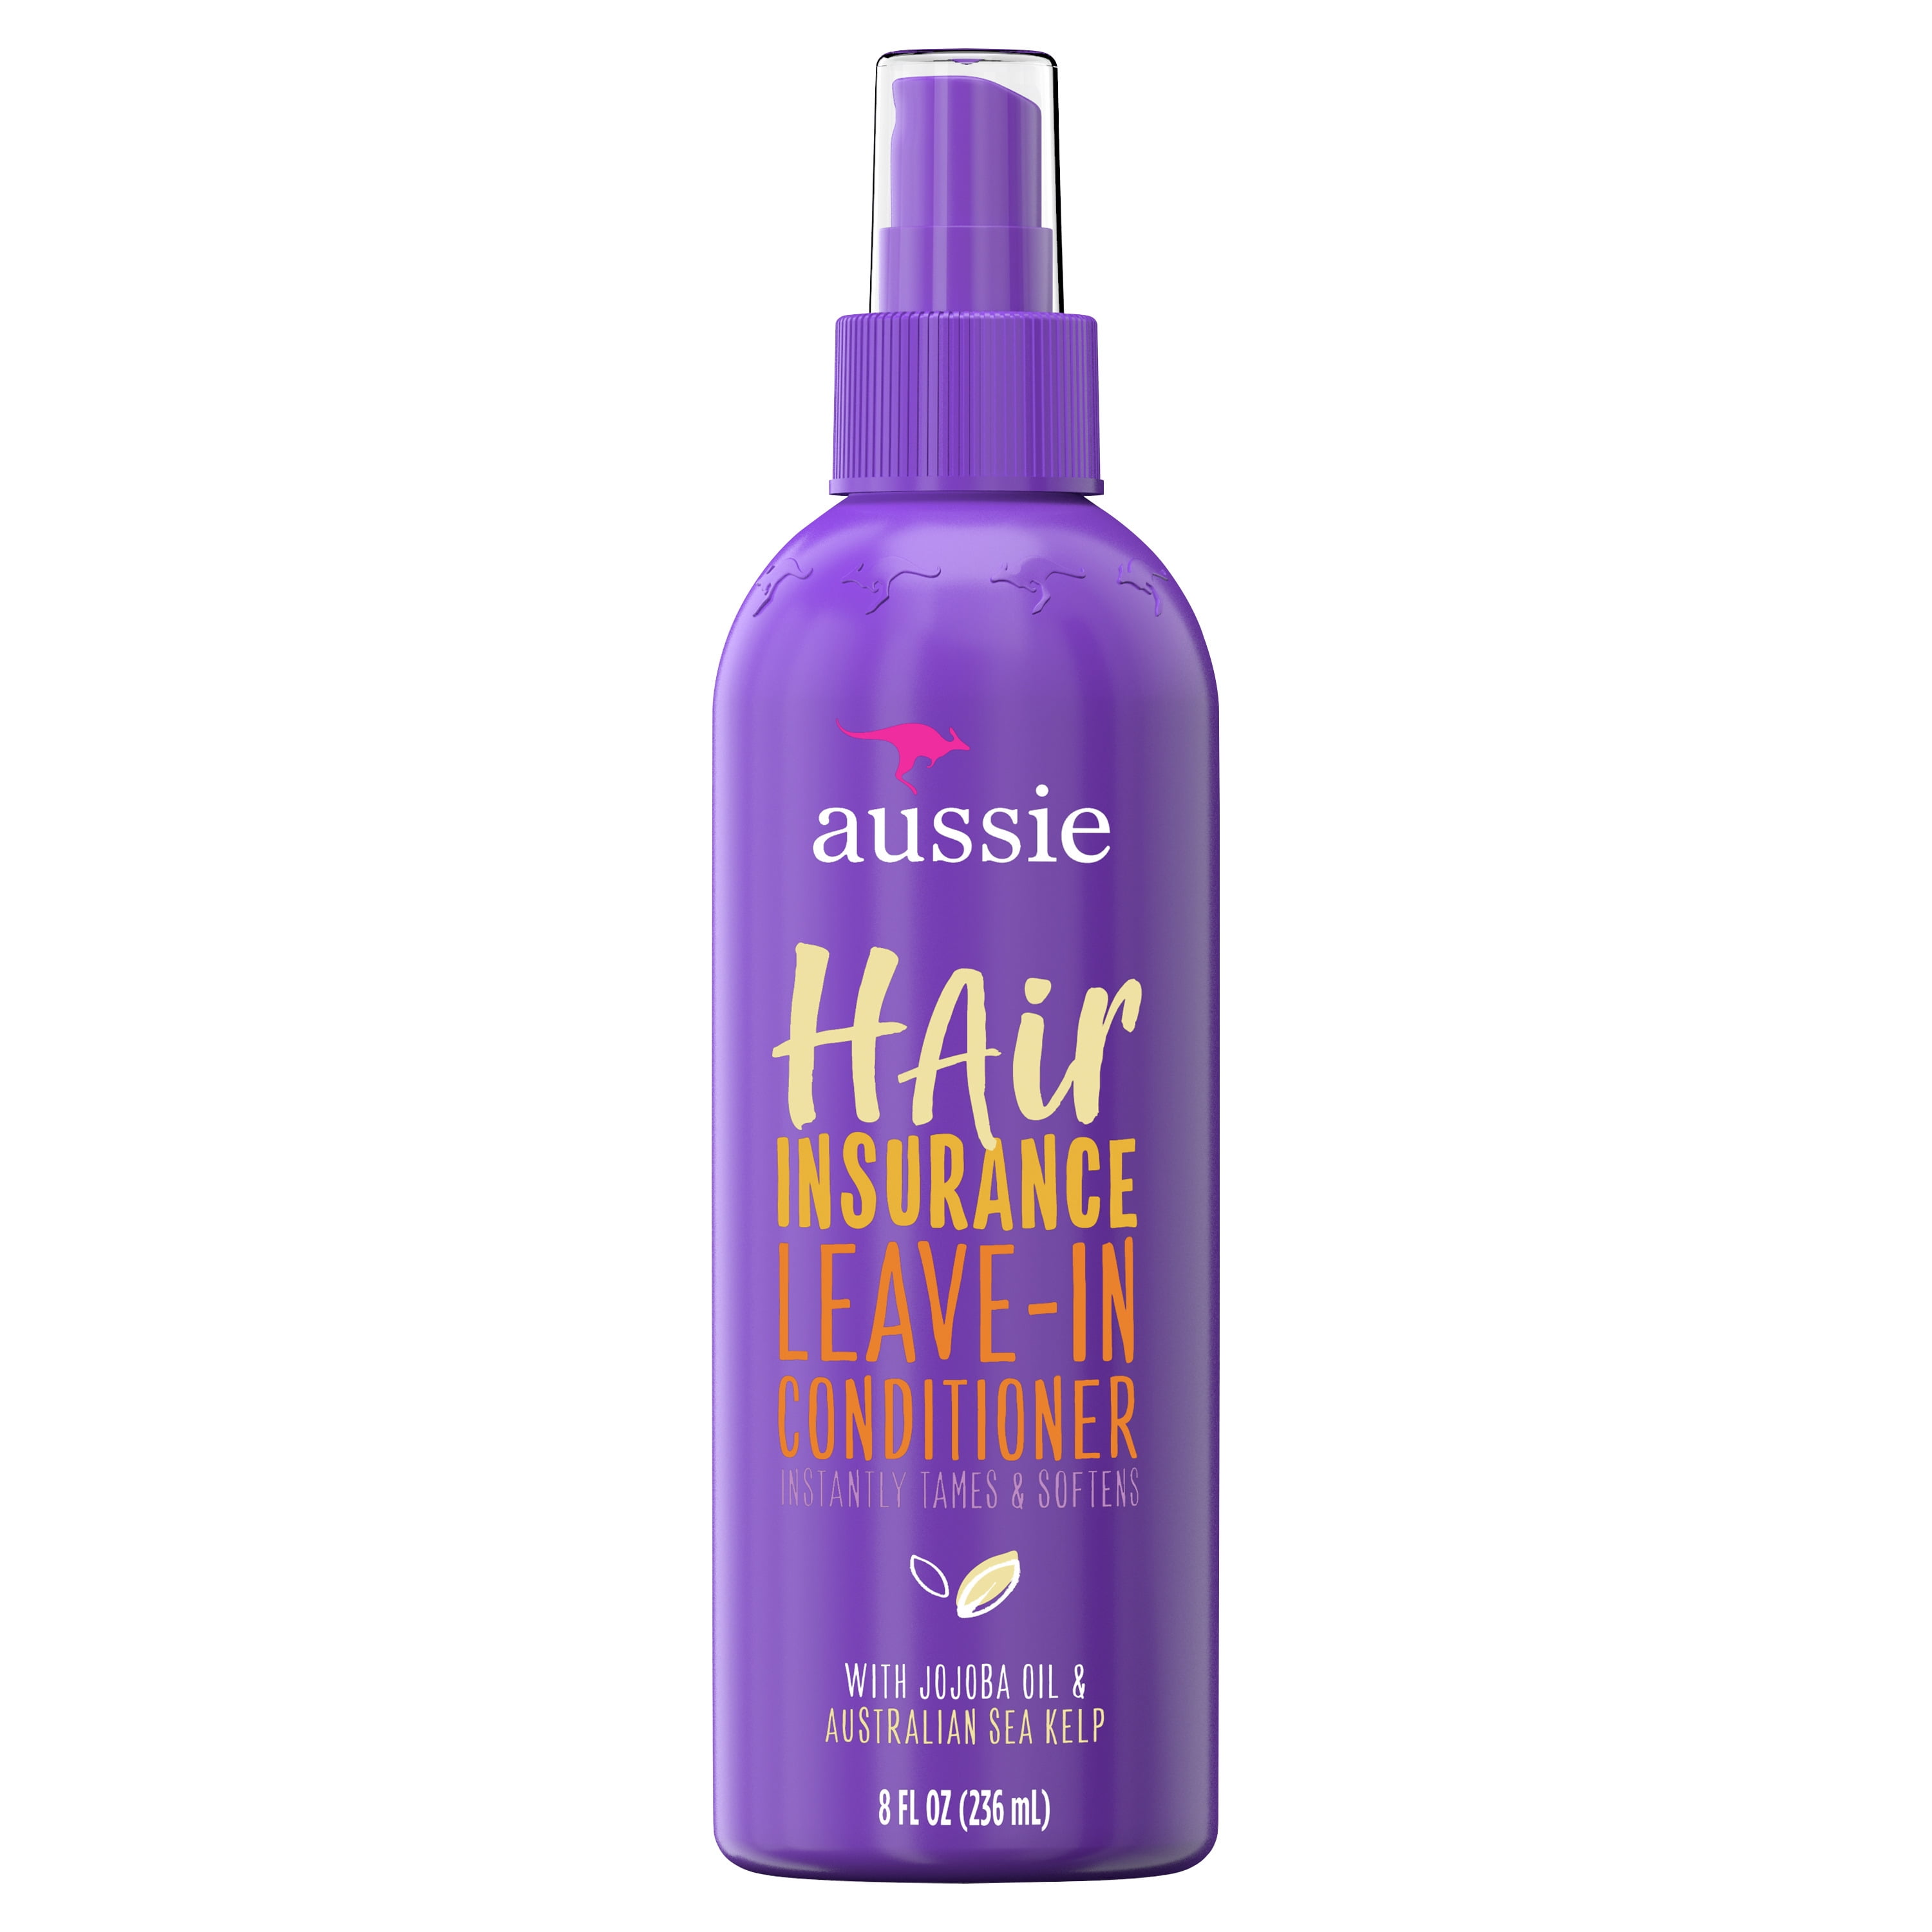 Aussie Hair Insurance Leave-In Conditioner with Jojoba and Sea Kelp, 8.0 fl oz